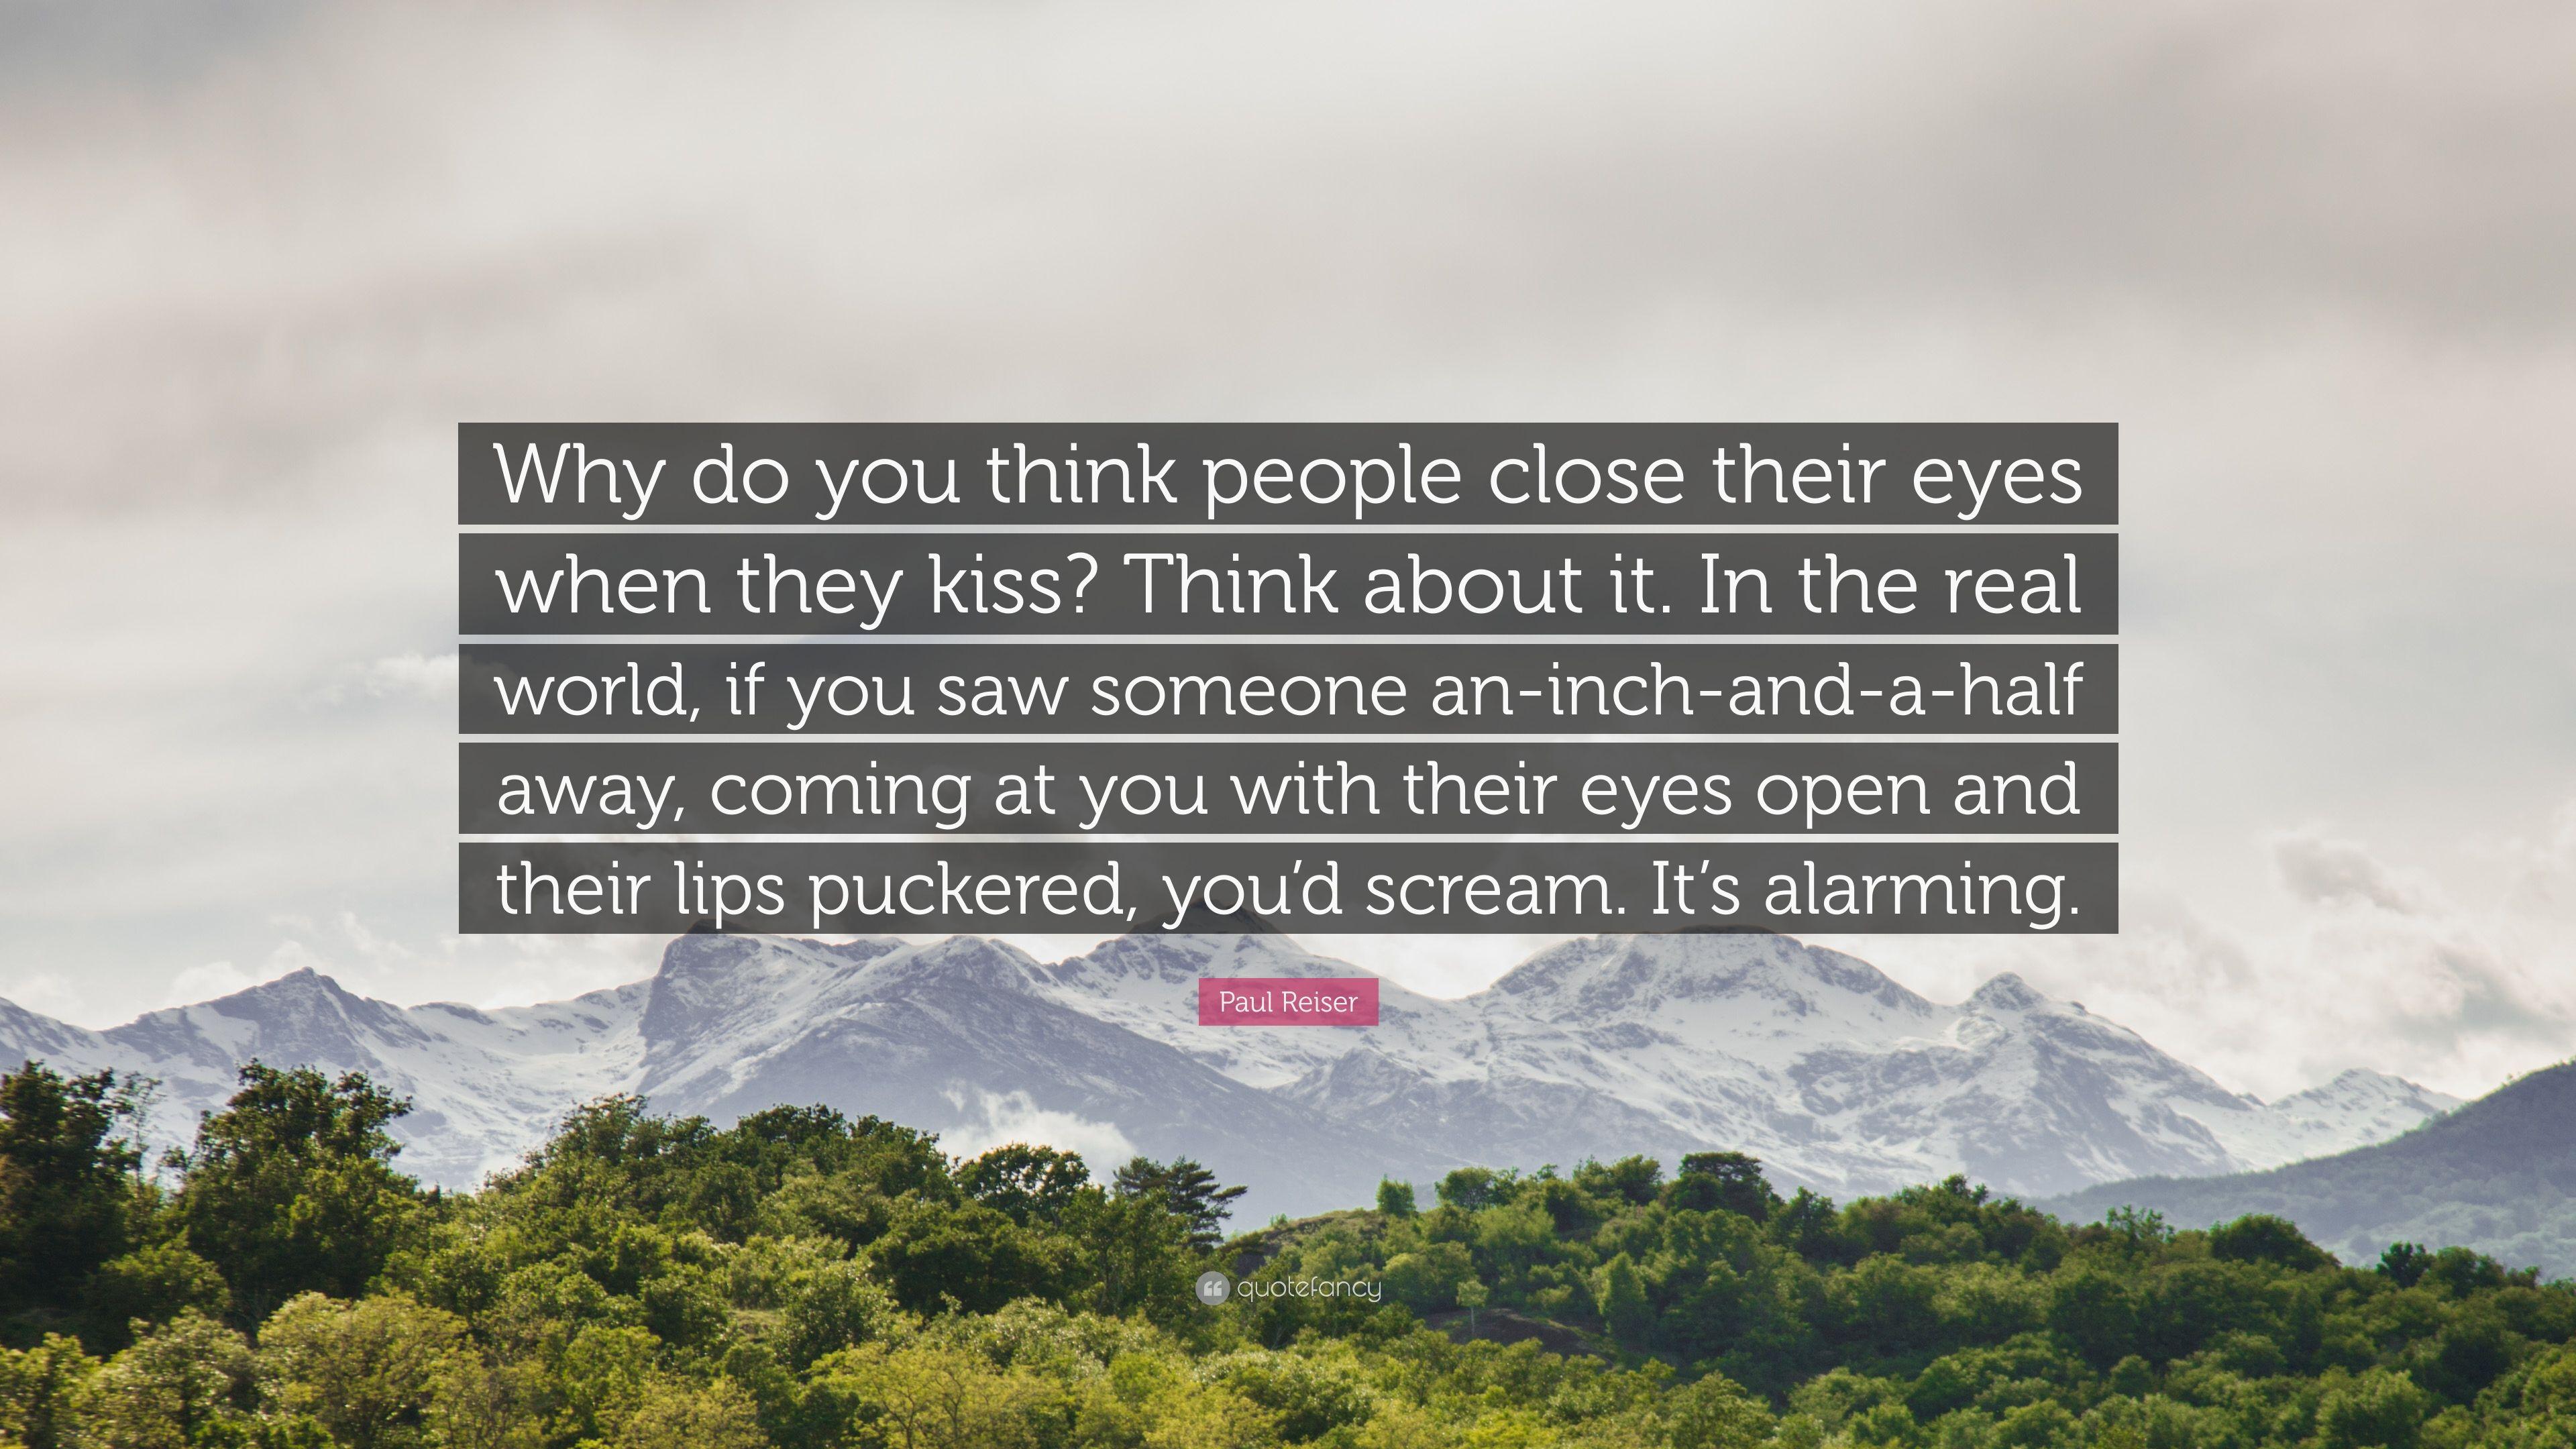 Paul Reiser Quote: “Why do you think people close their eyes when